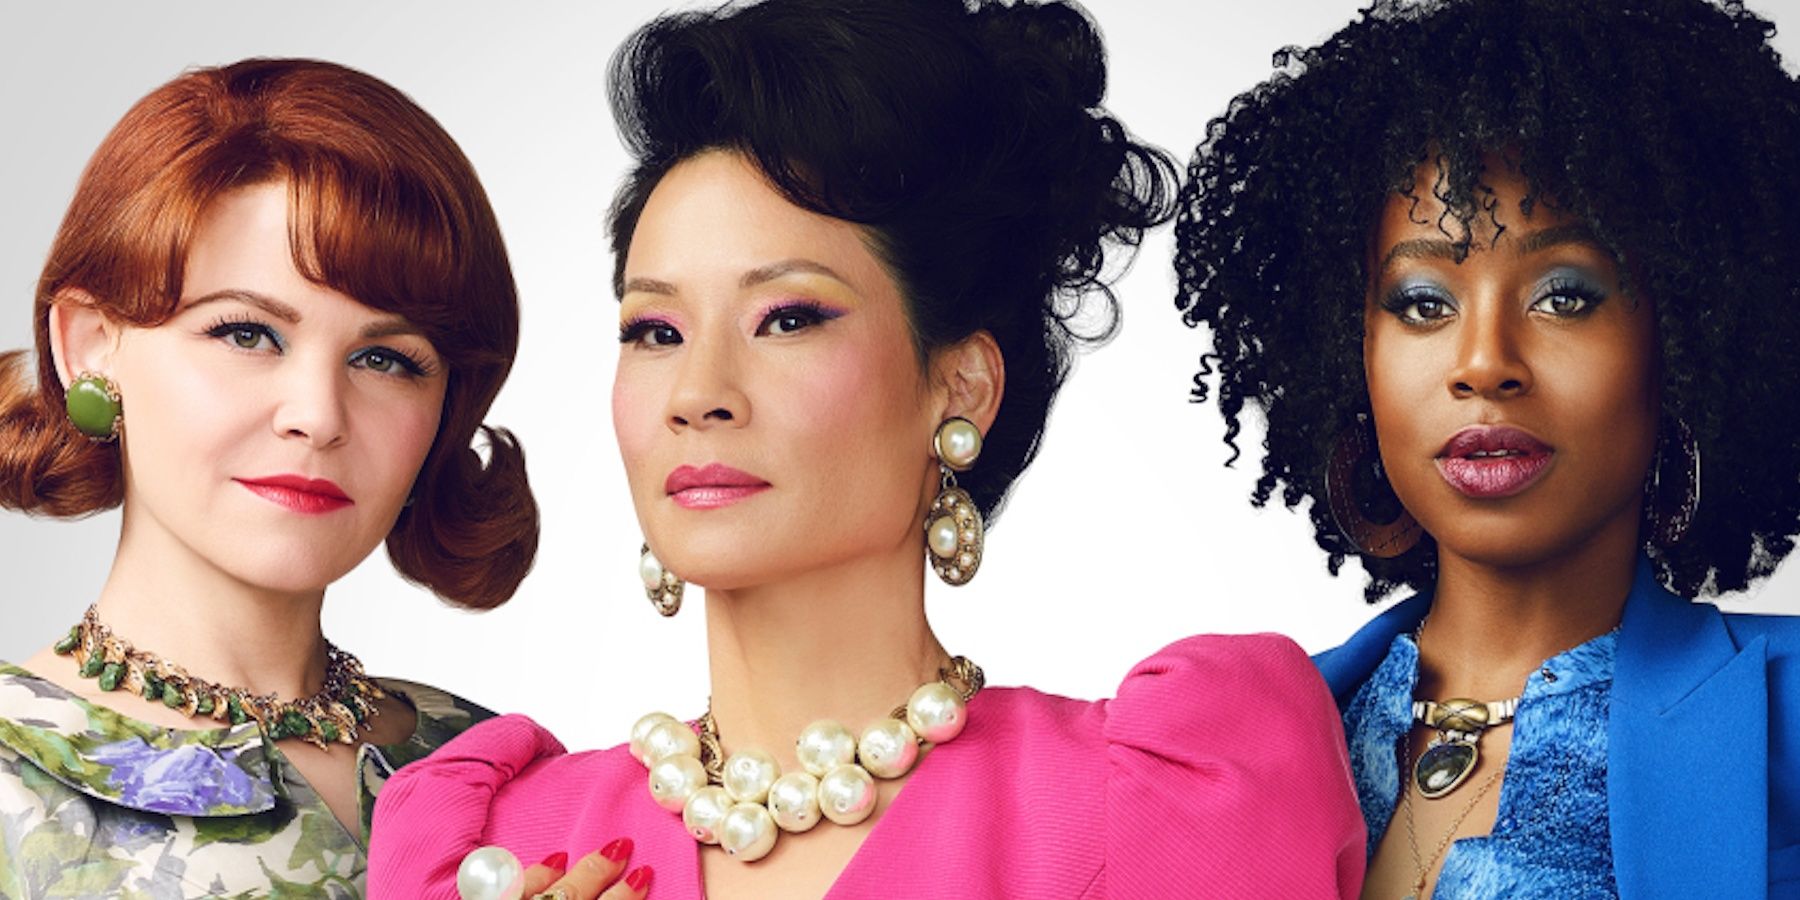 Ginnifer Goodwin, Lucy Liu, and Kirby Howell-Baptiste in a promotional image for Why Women Kill